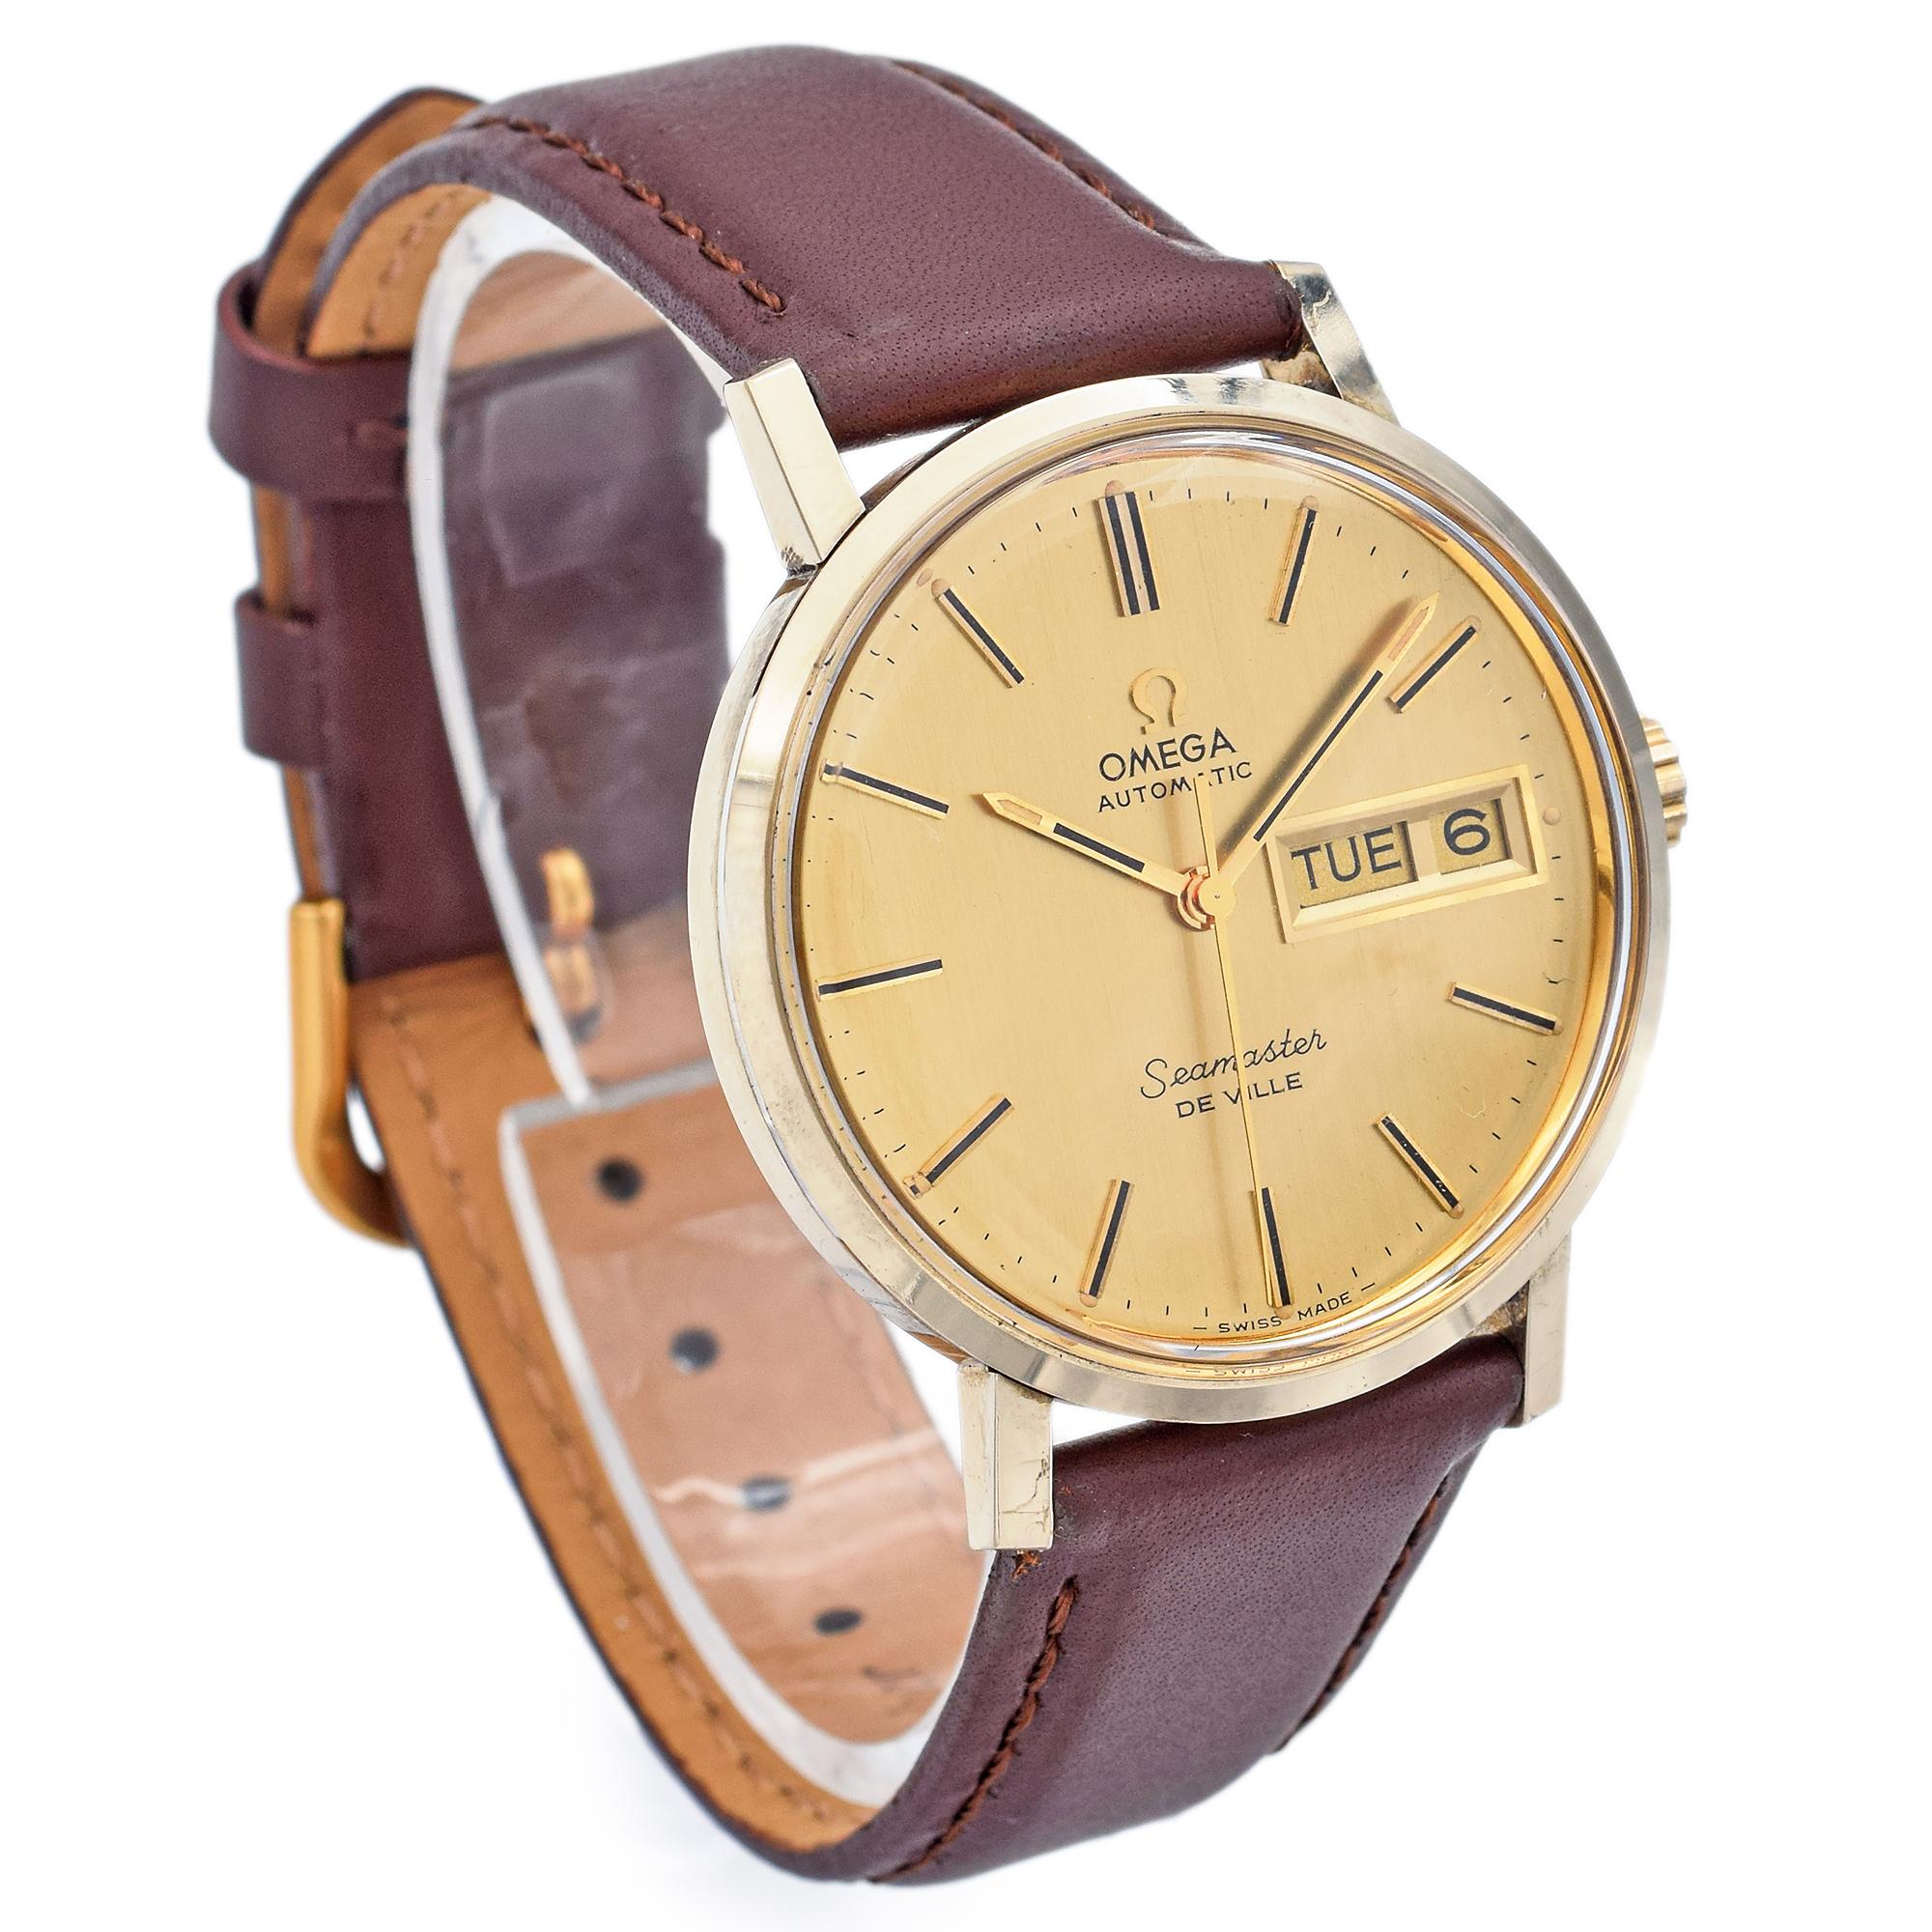 mens gold omega watch